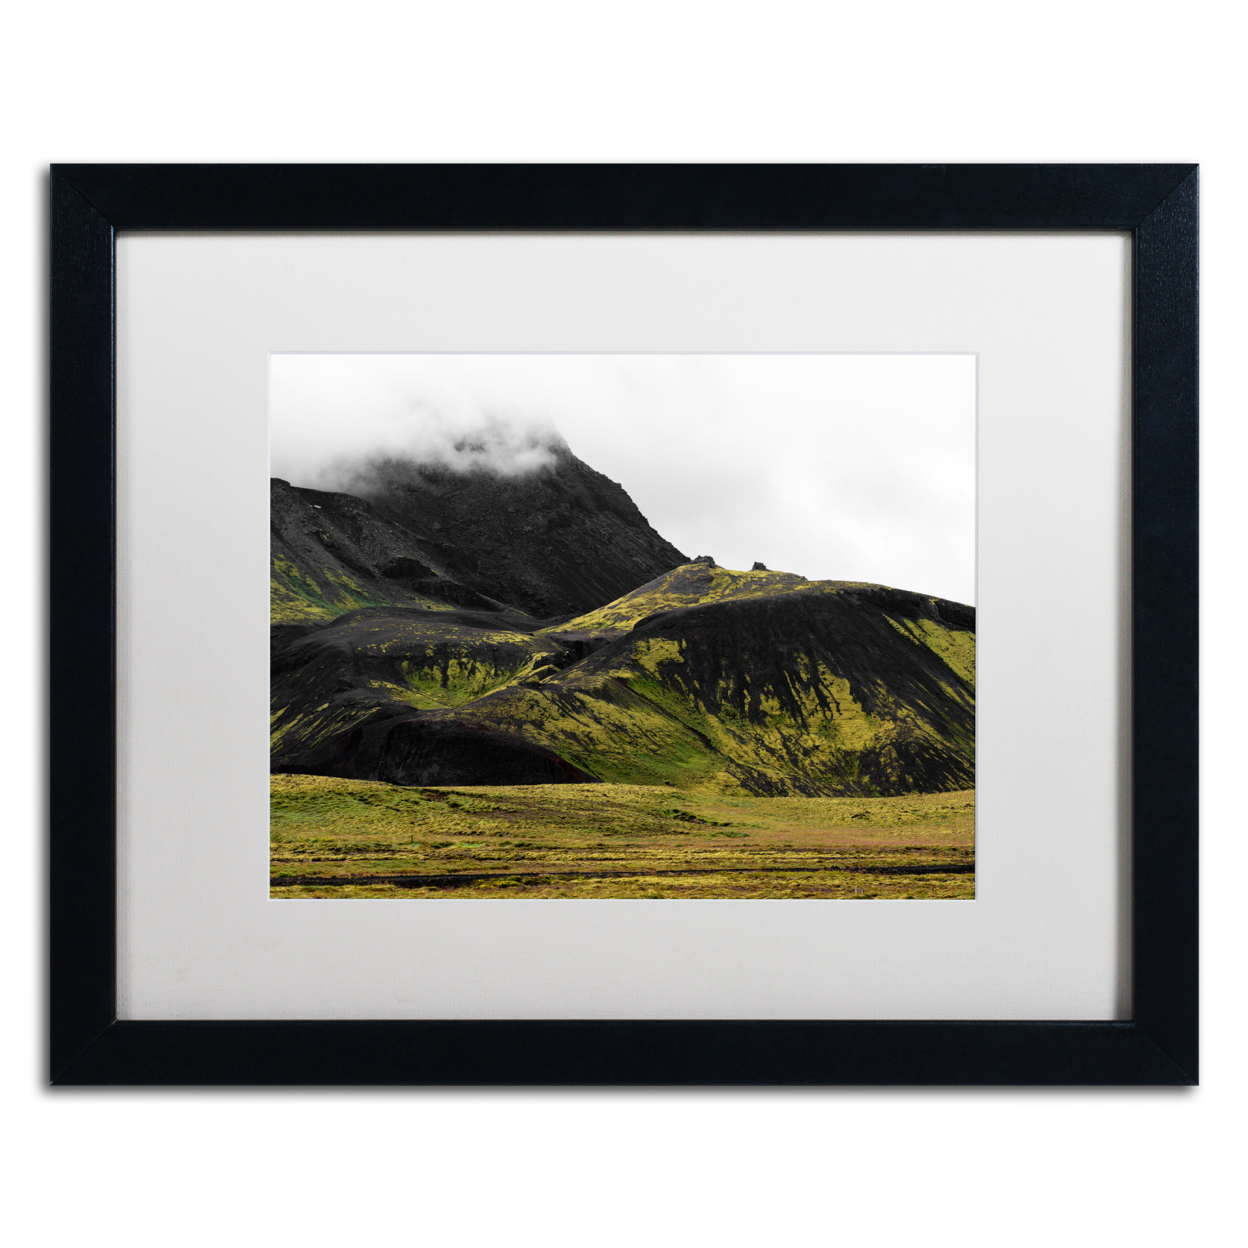 Philippe Sainte-Laudy 'Black Mountains' Black Wooden Framed Art 18 X 22 Inches